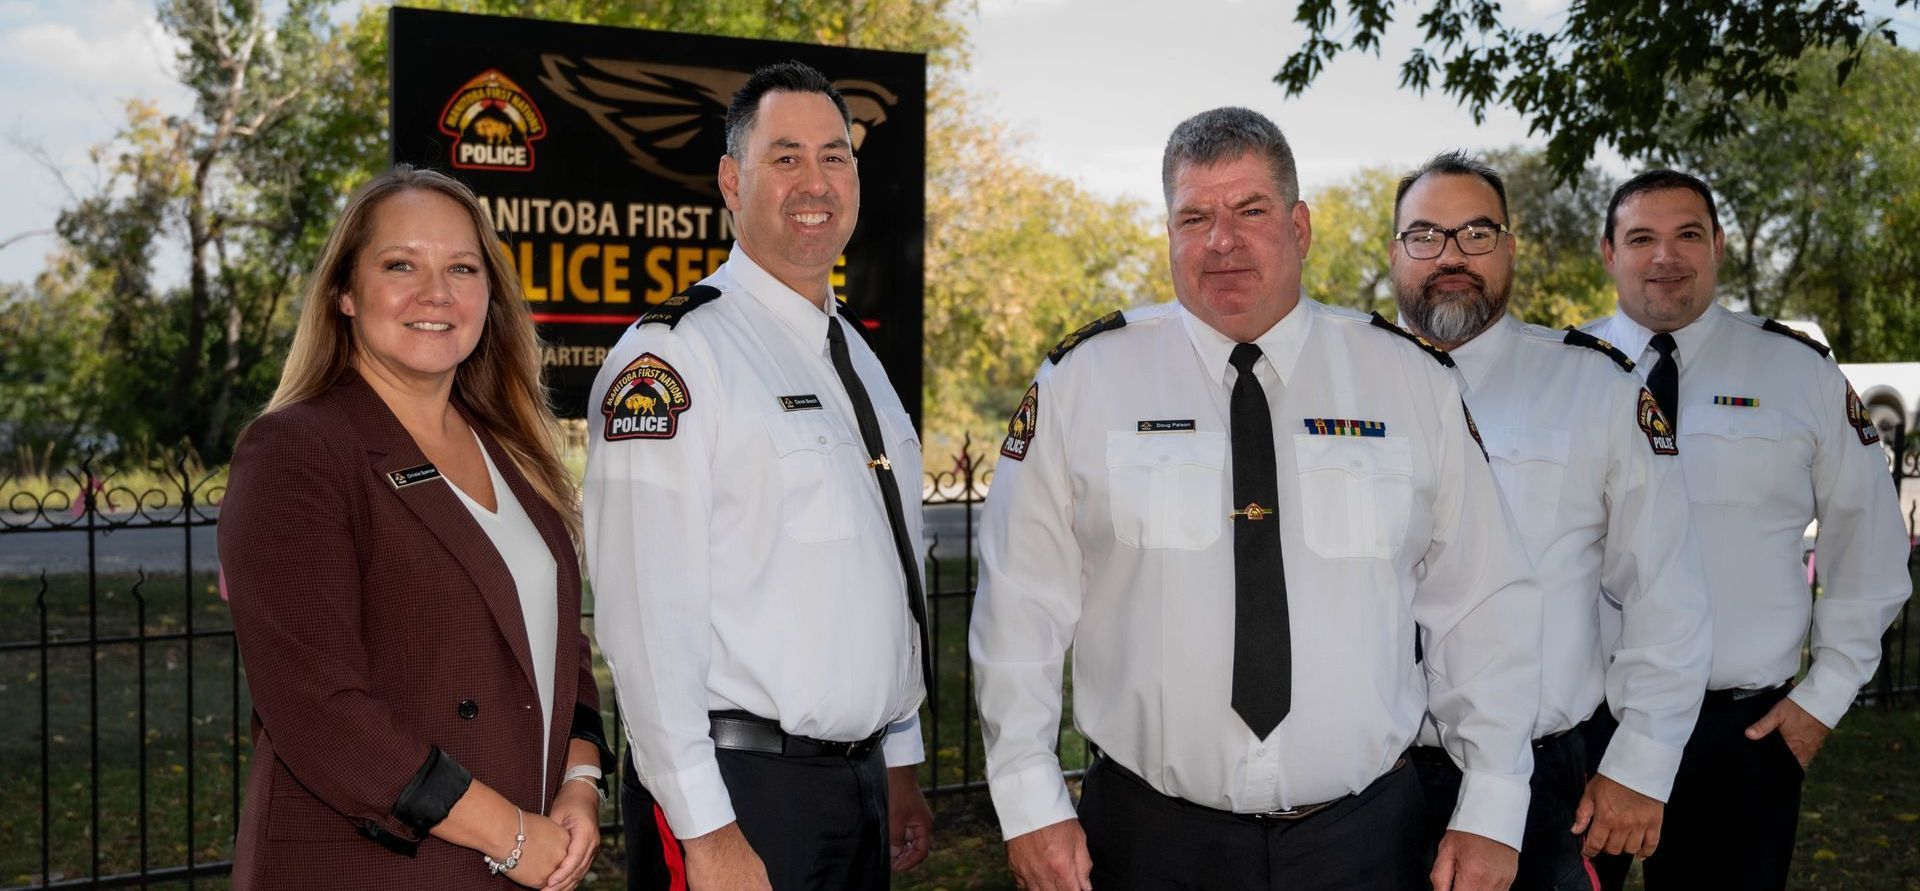 MFNPS-Manitoba First Nations Police Service - Management Team